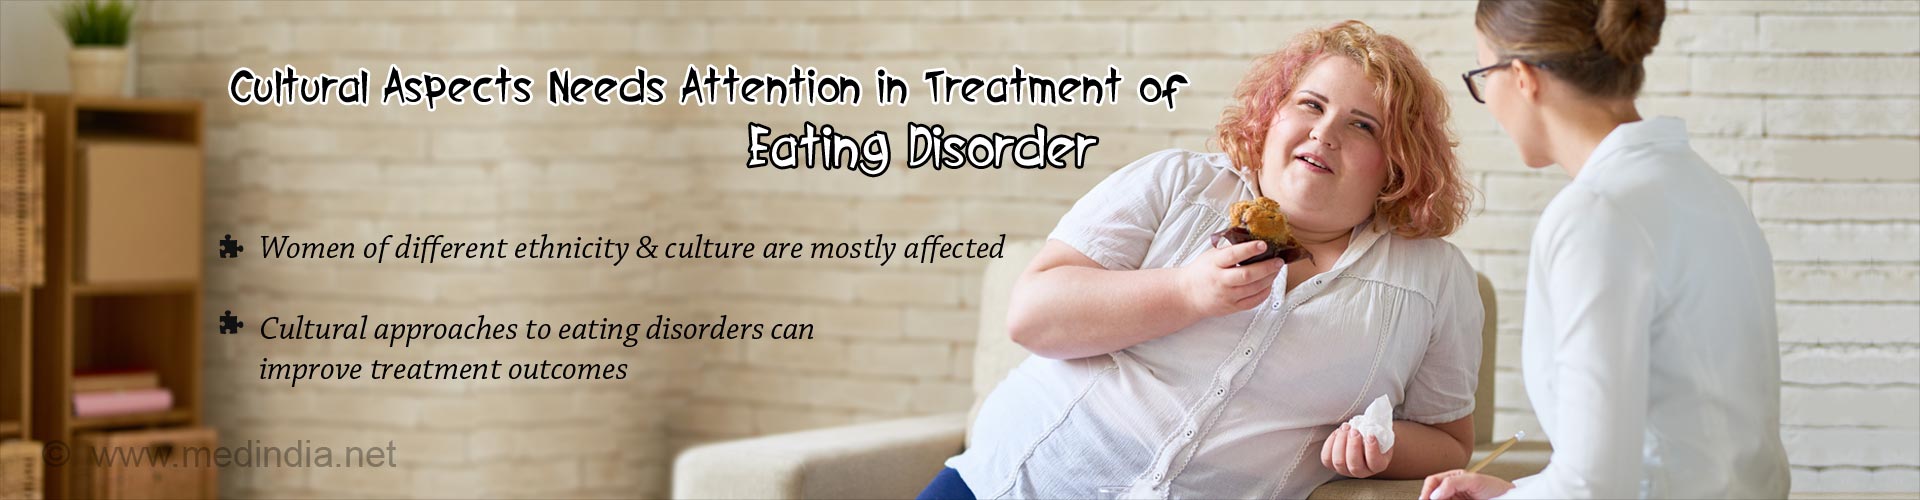 cultural aspects needs attention in treatment of eating disorder
- women of different ethnicity & culture are mostly affected
- cultural approaches to eating disorders can improve treatment outcomes